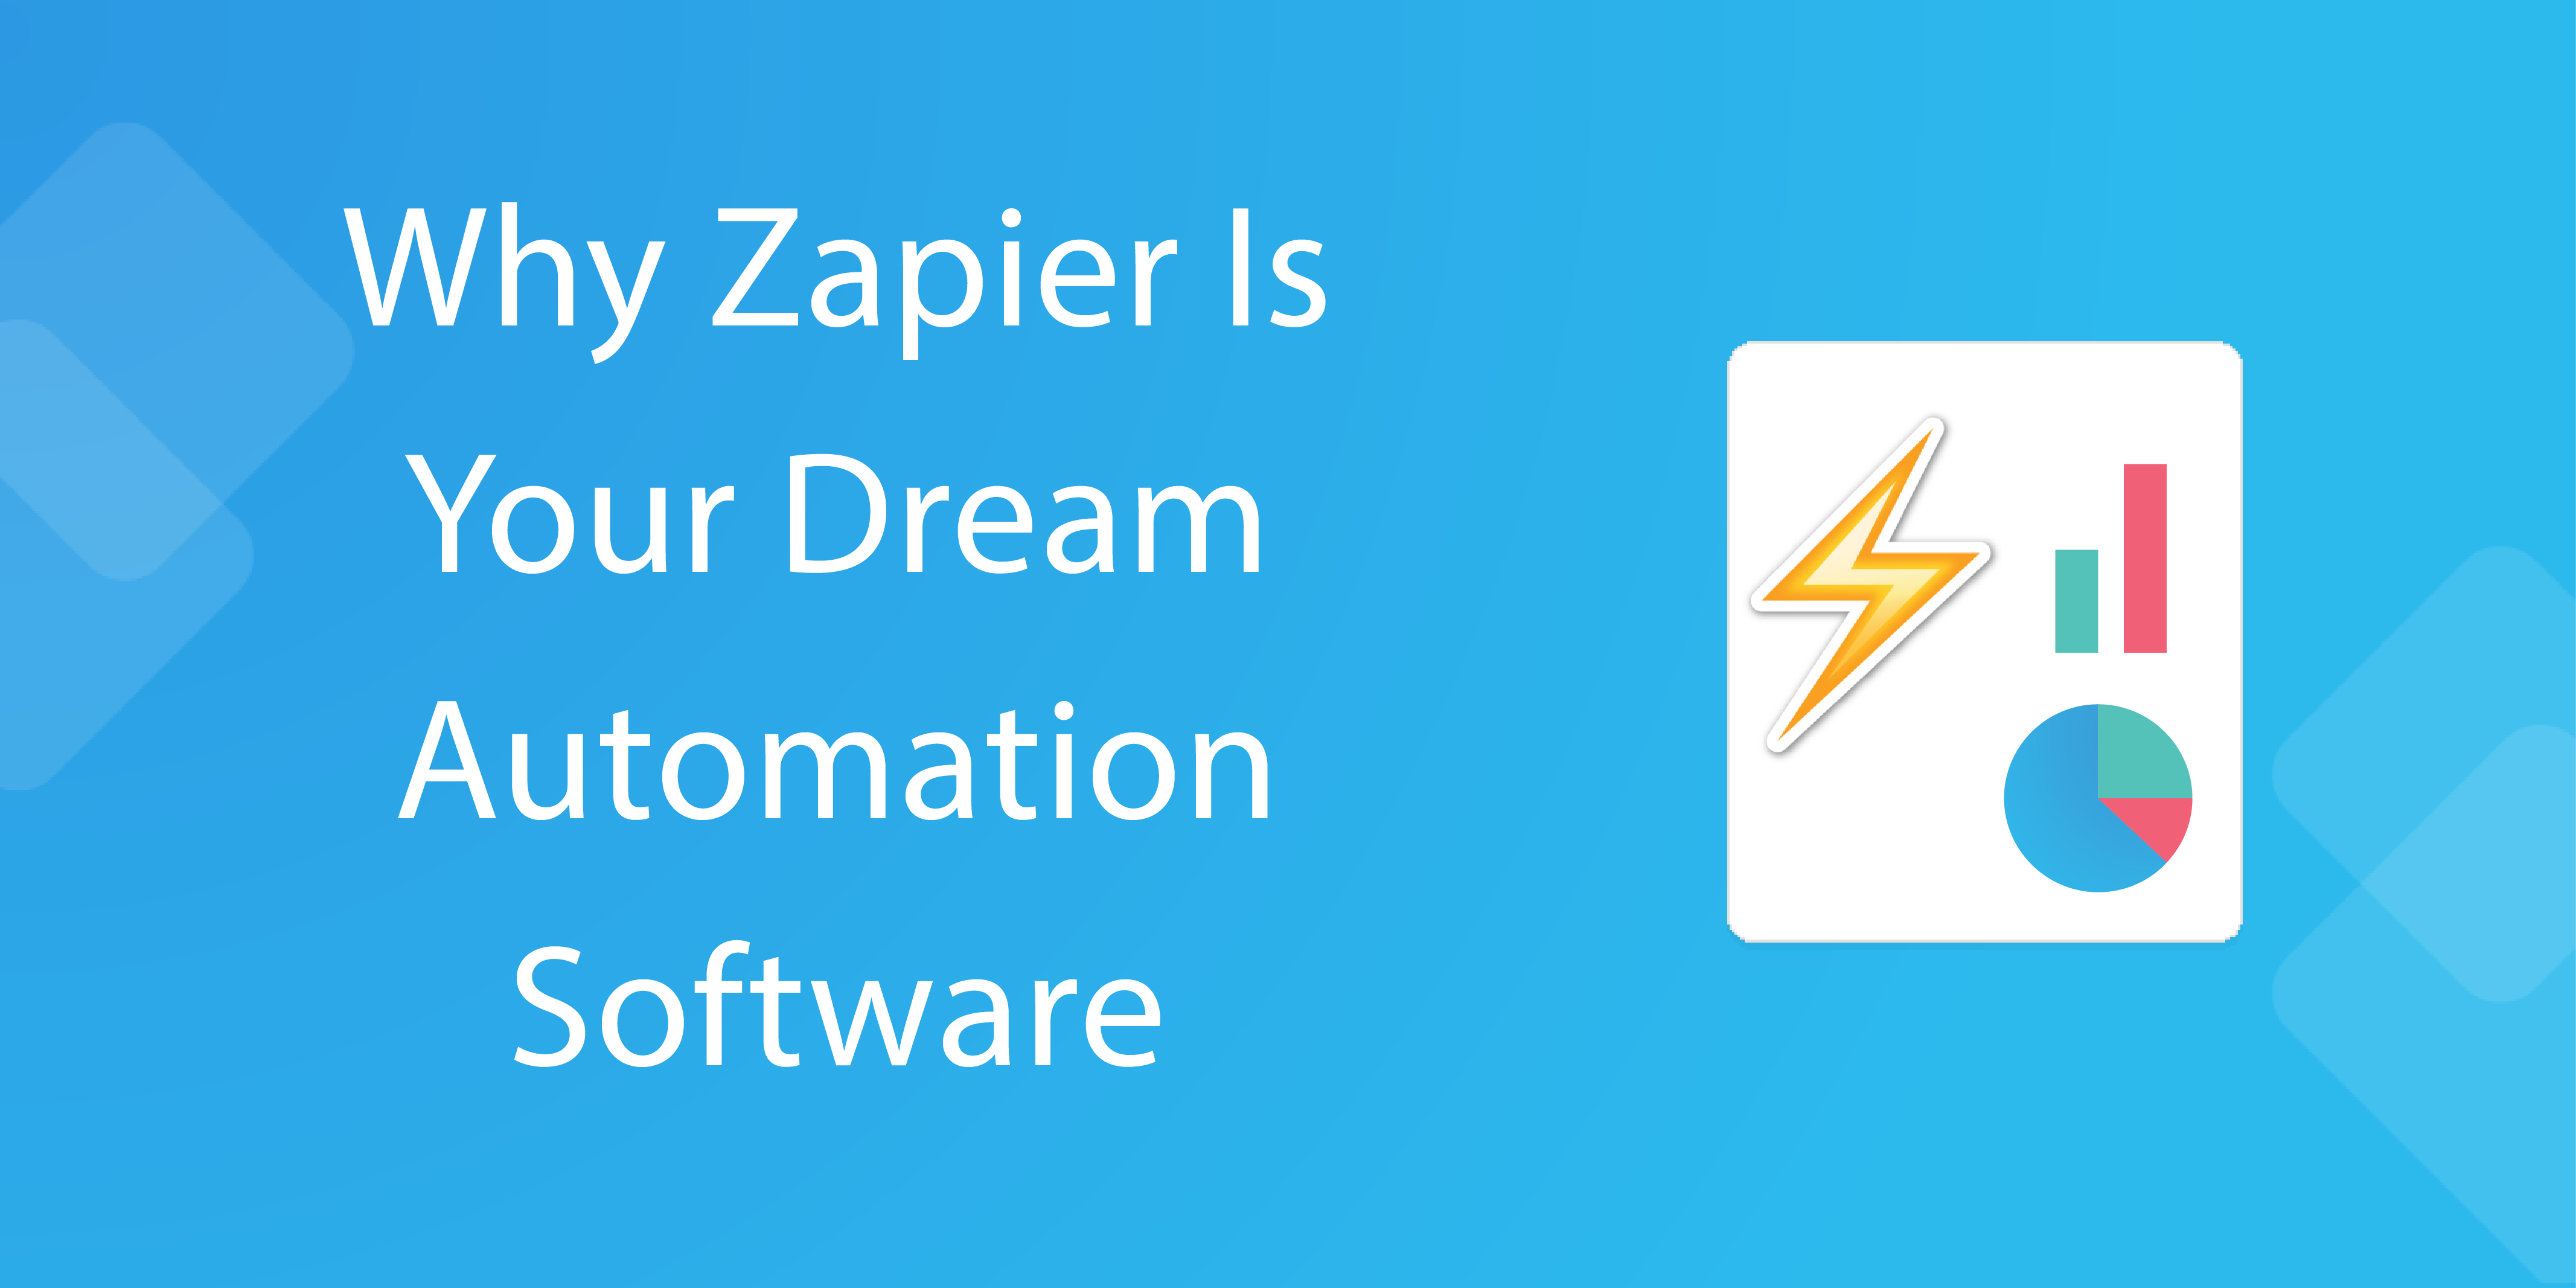 automation software - header